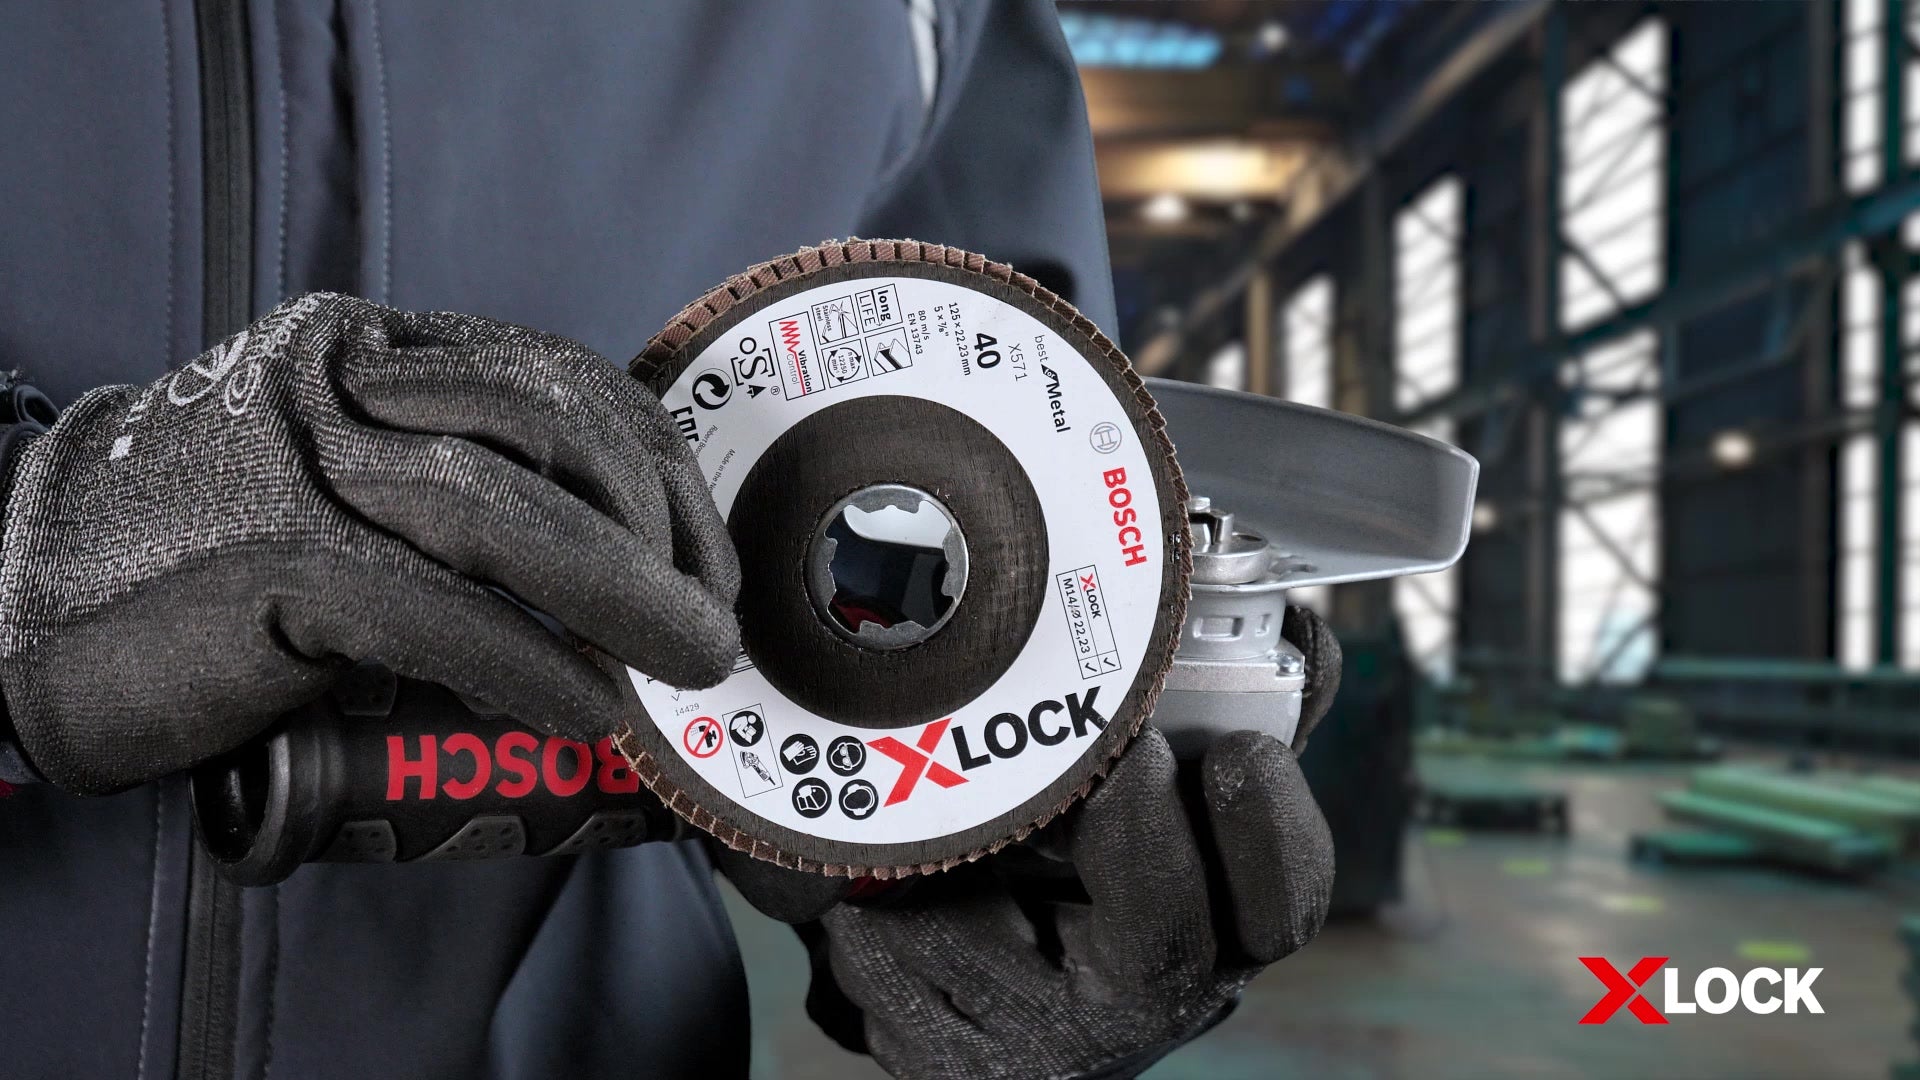 X571 Best for Metal X-Lock Flap Discs, Angled Version by Bosch